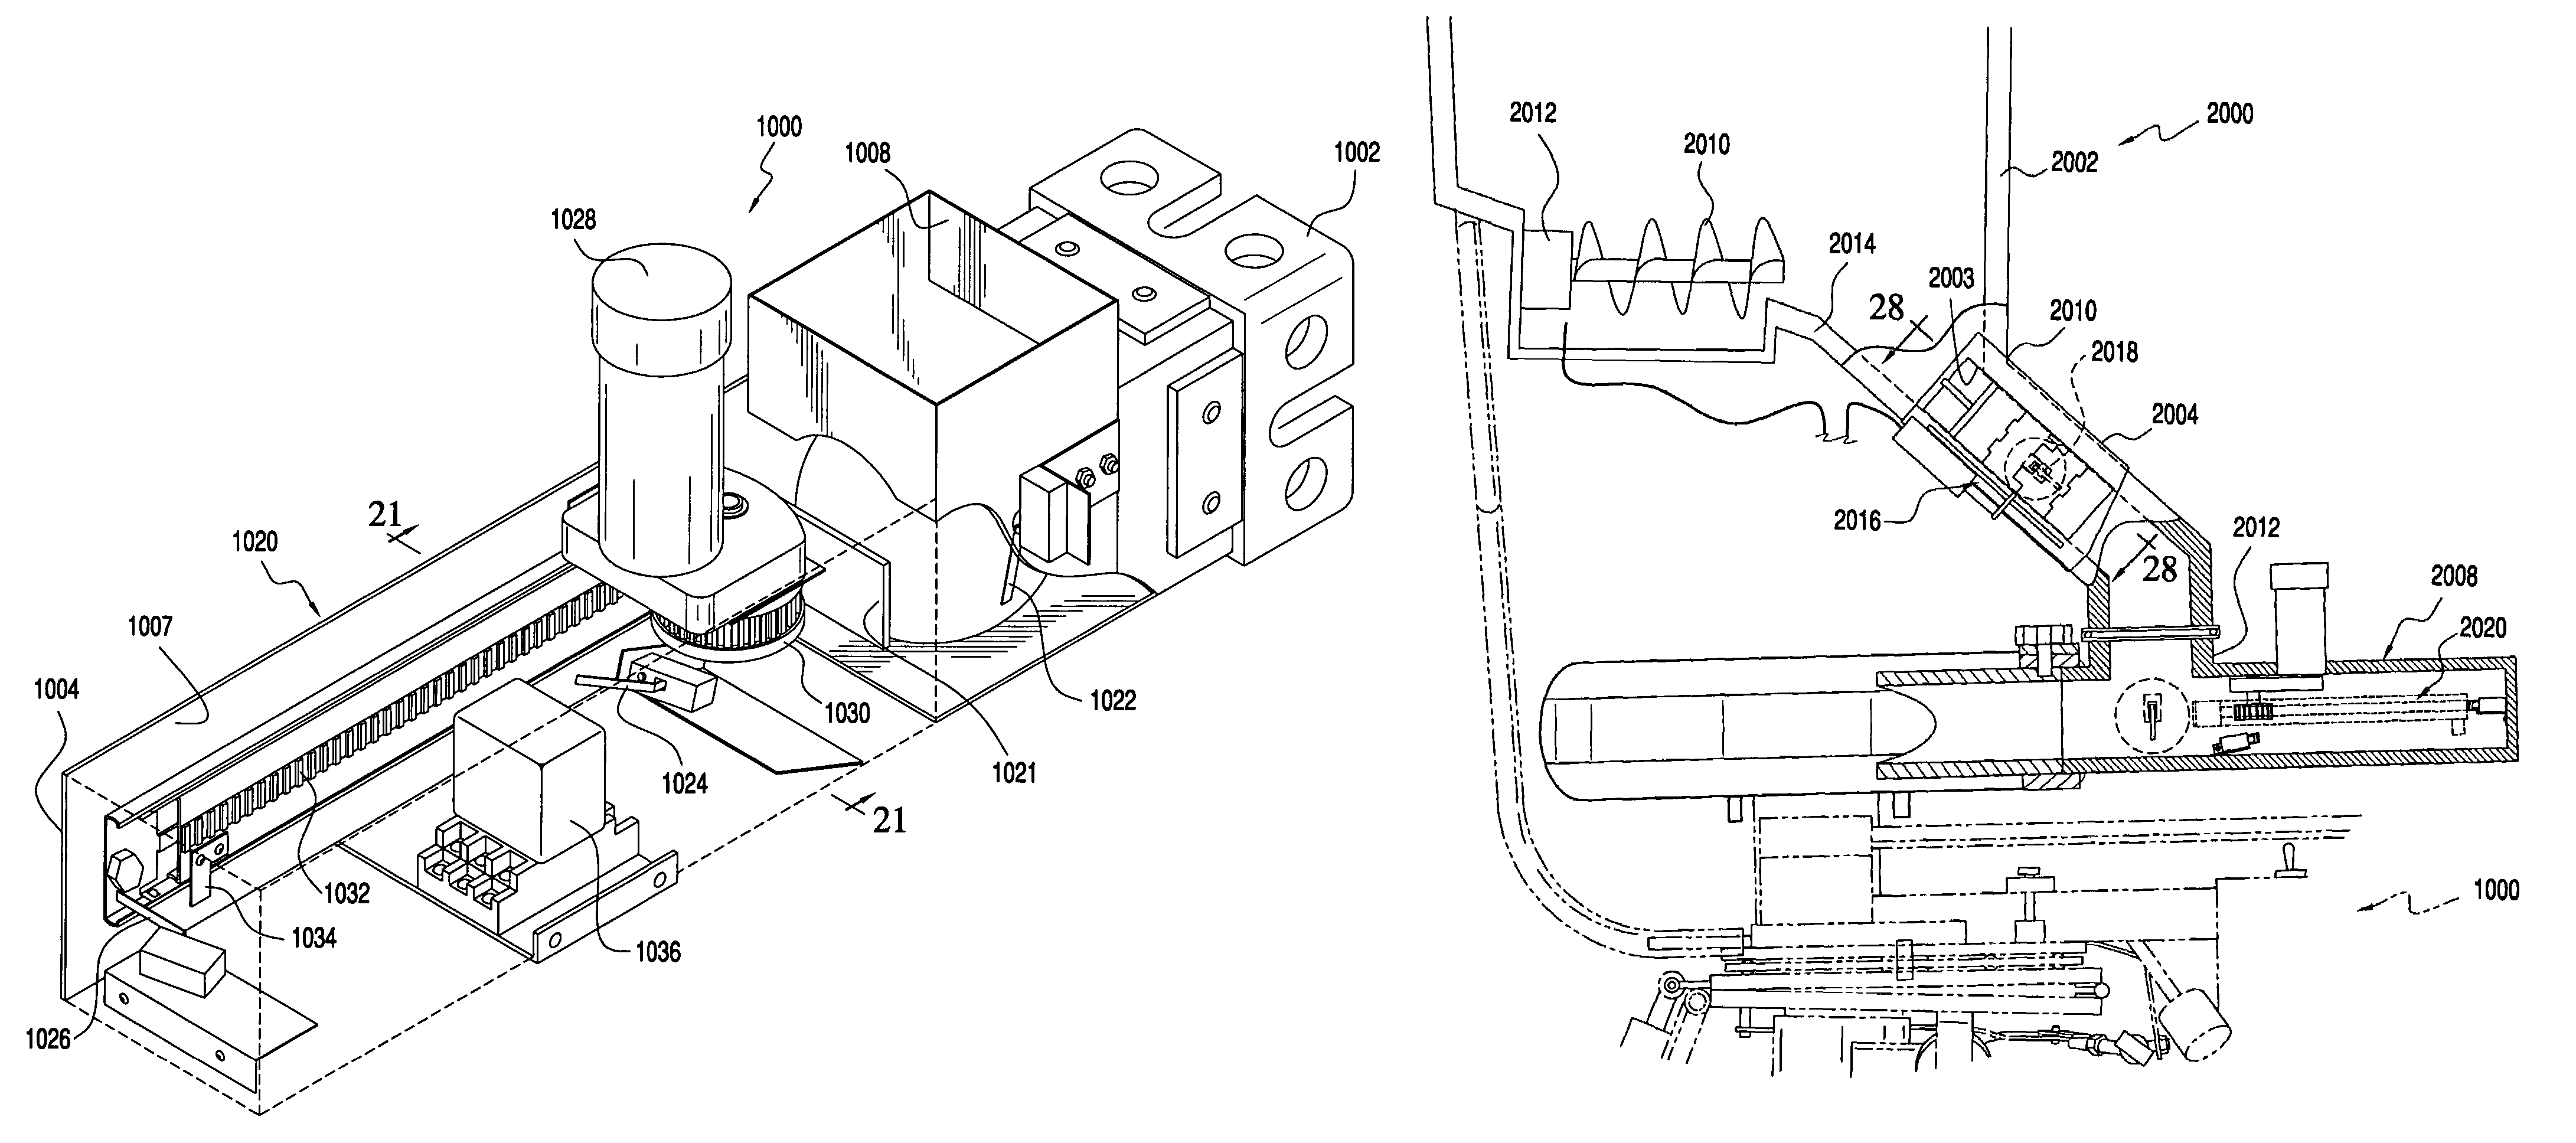 Automatic ball throwing device, directing device therefor and method of making an automatic ball throwing device